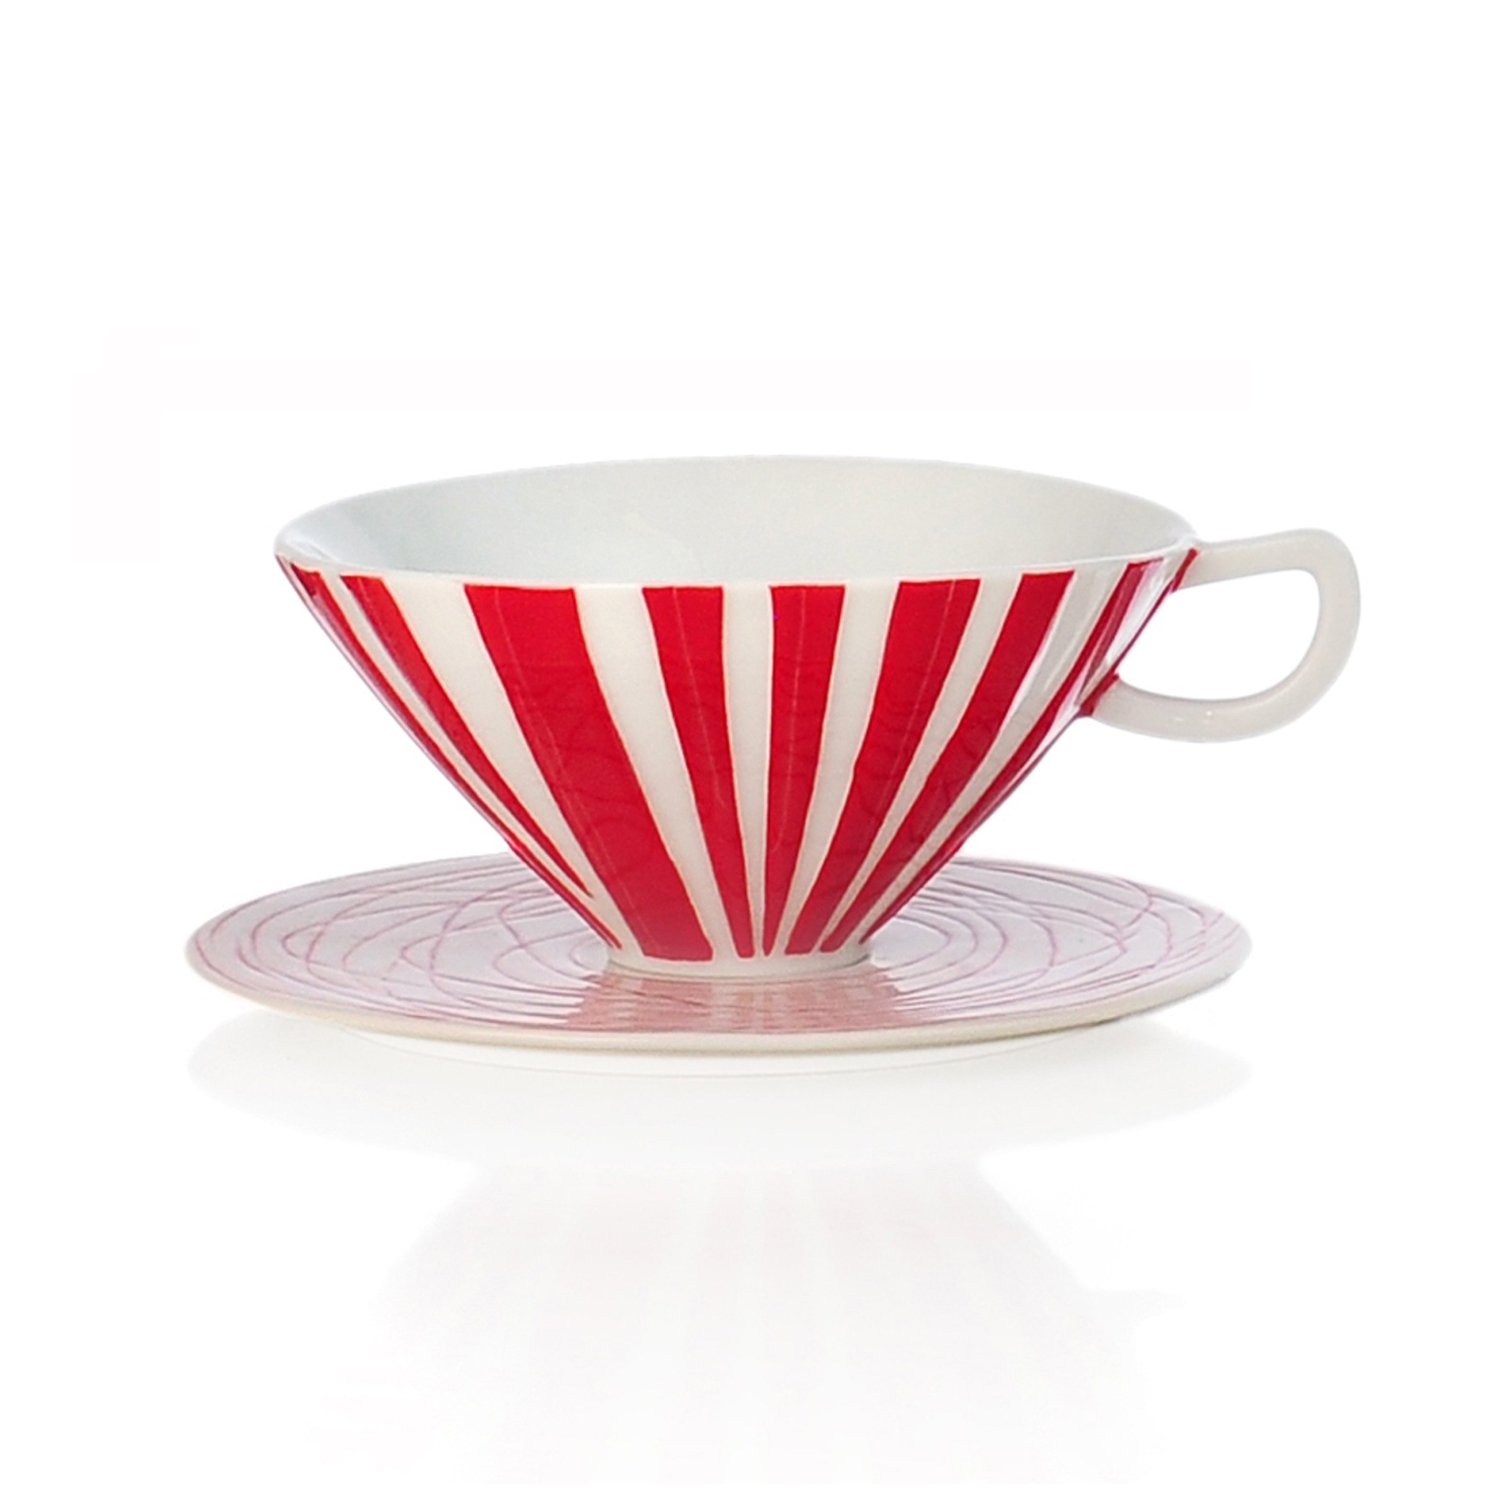 Tea Cup August L'Abitare collection Seasons